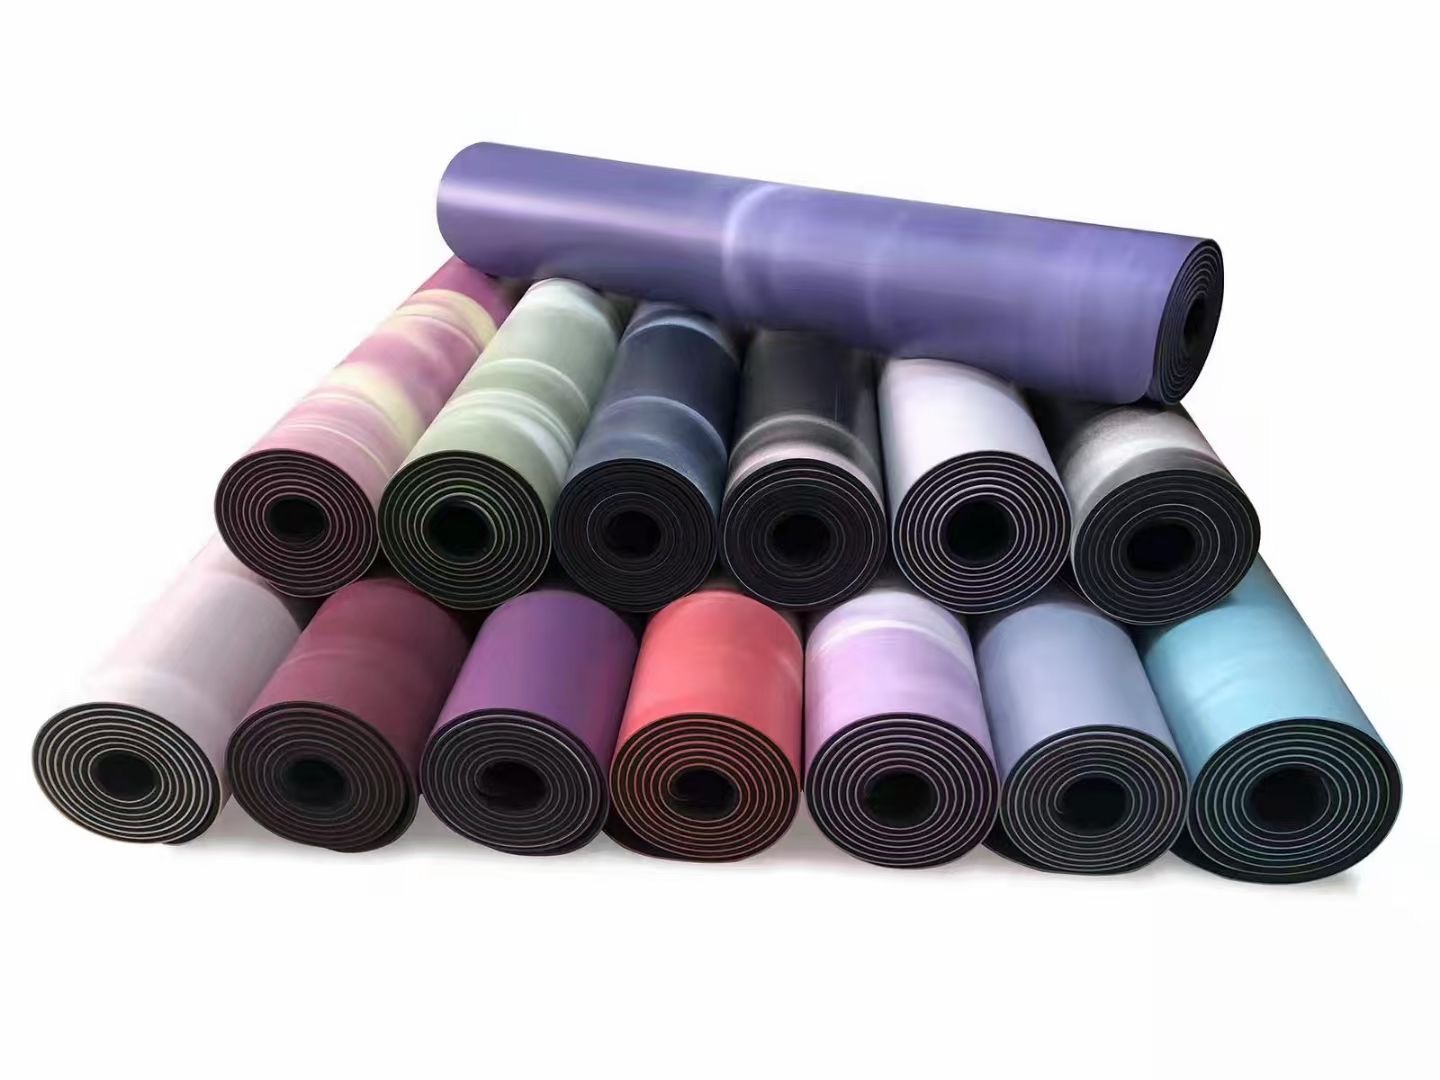 How to Choose a Yoga Mat